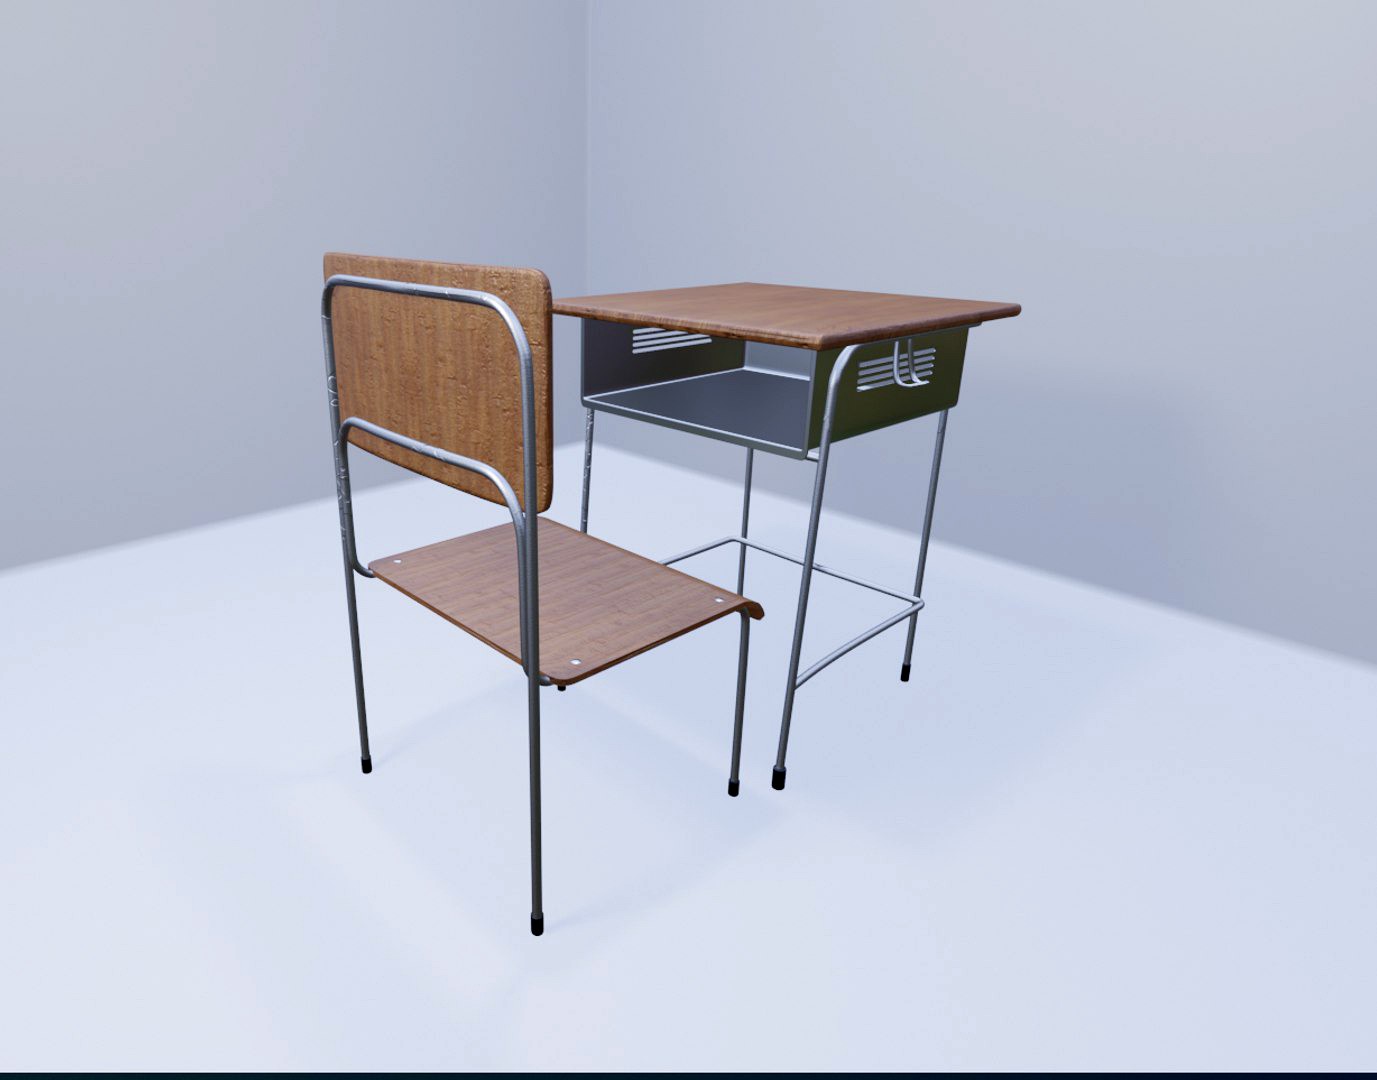 Study Chair with Desk